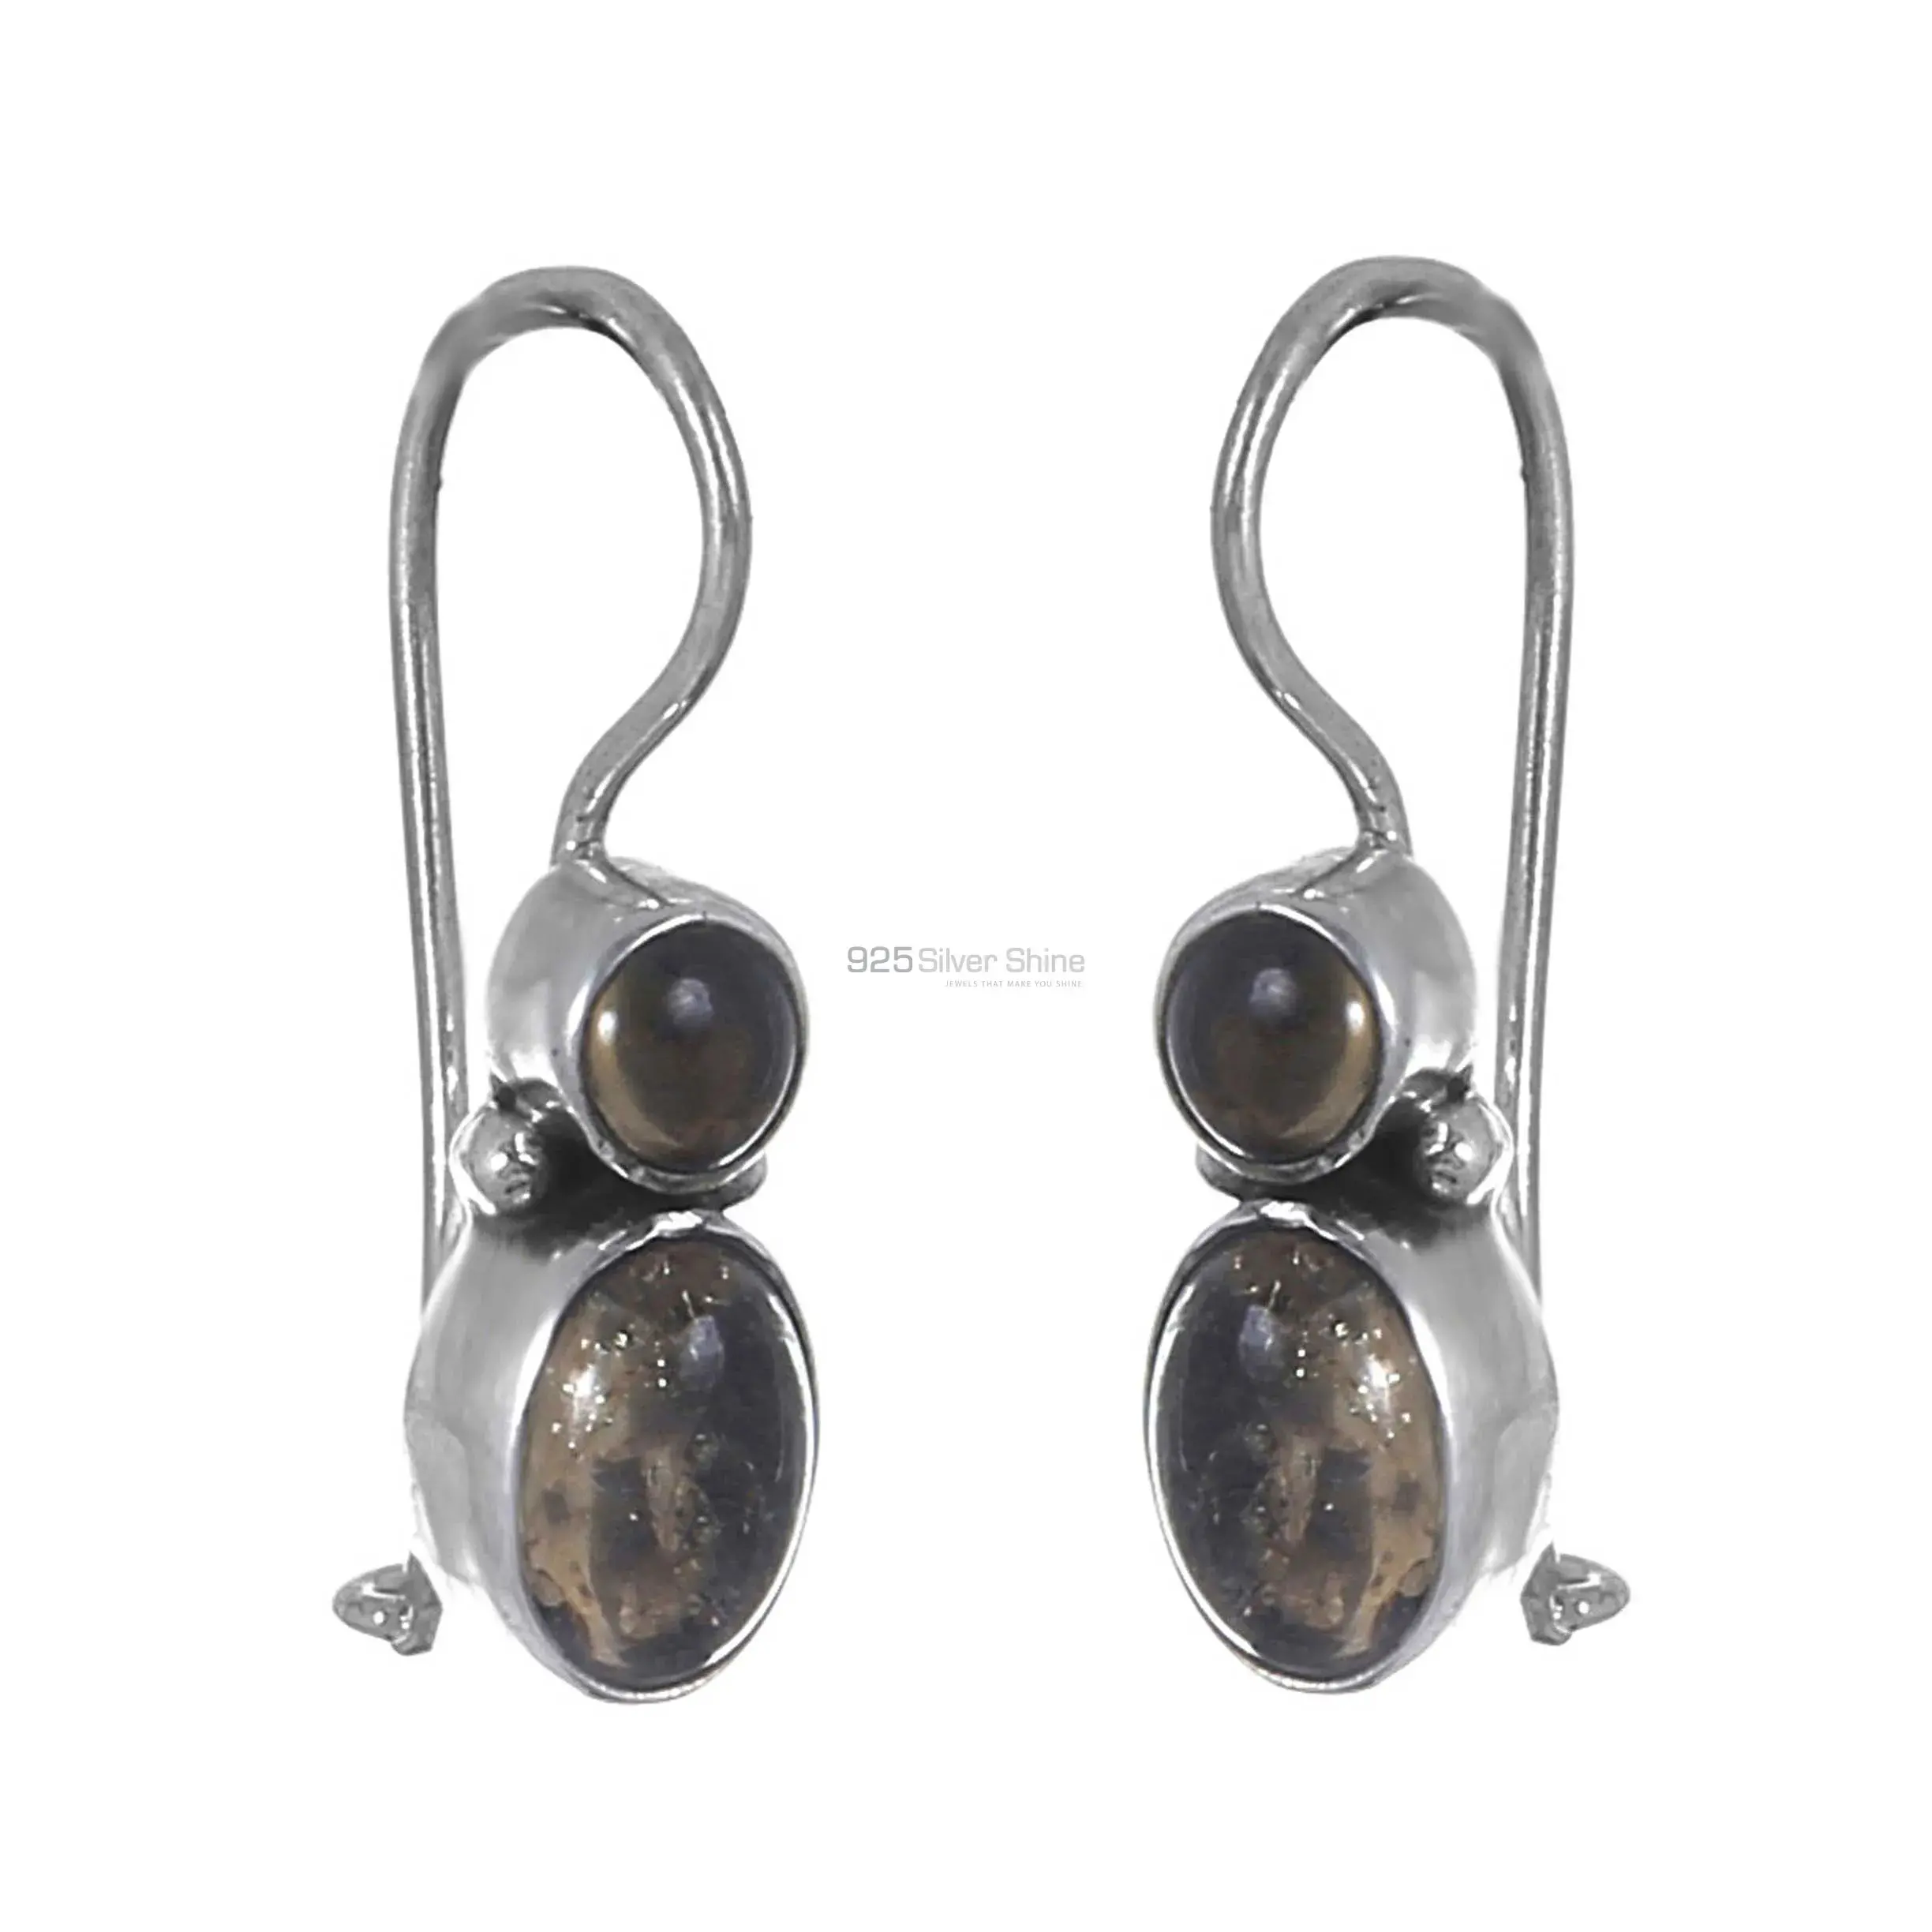 Solid 925 Silver Earrings In Natural Citrine Gemstone 925SE223_0